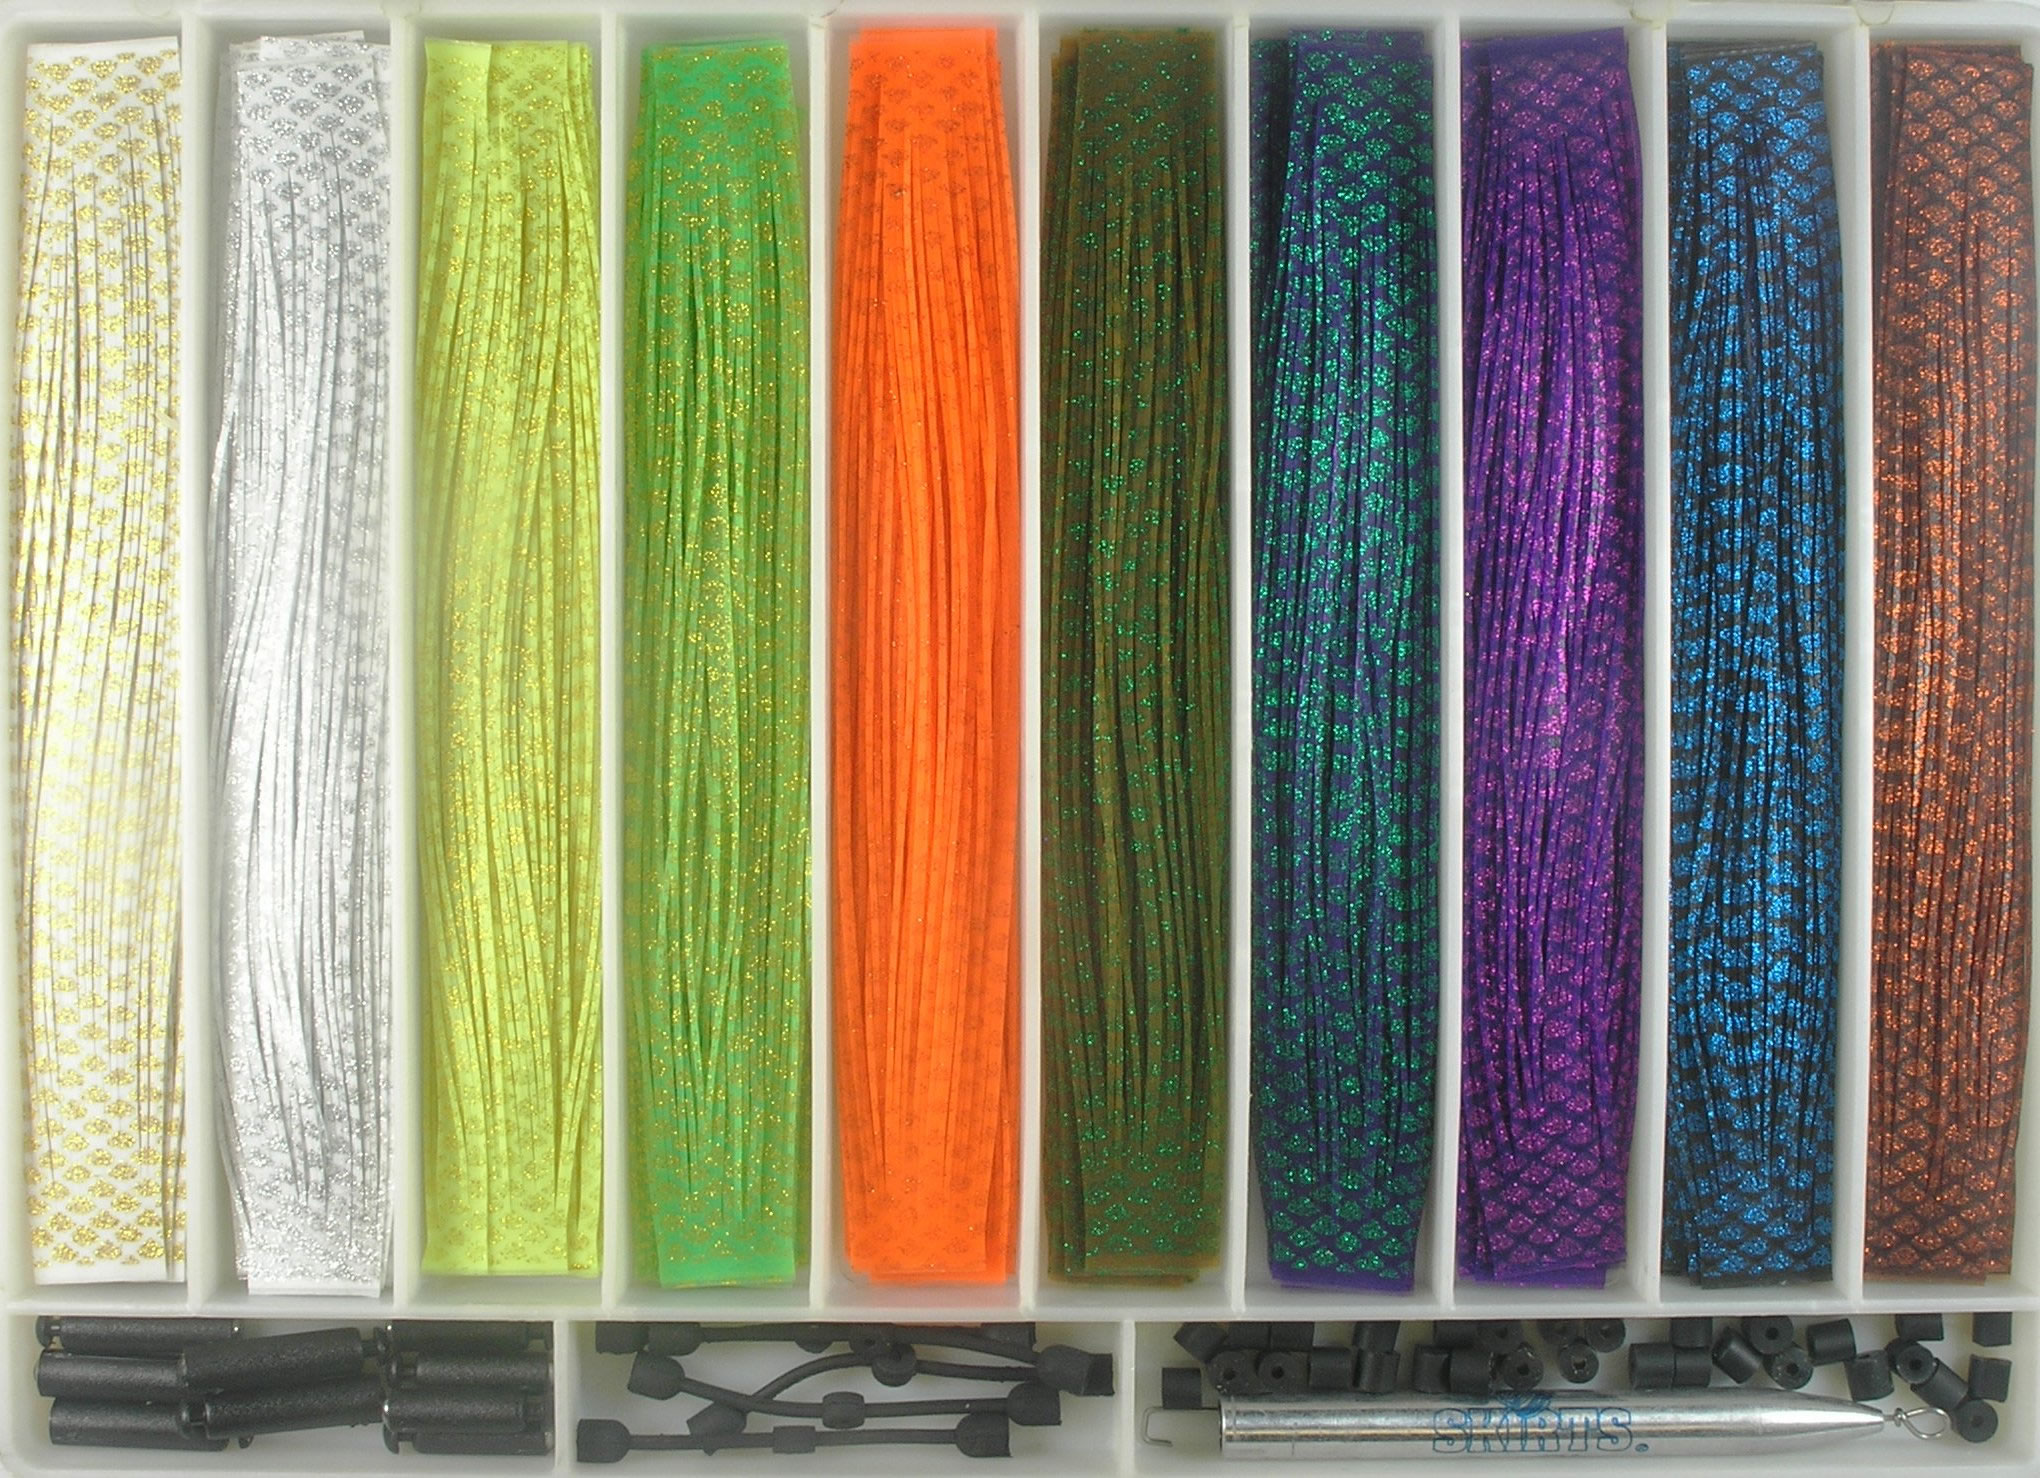 Details about   King Fishing Tools Custom Silicone Skirts,10 Count,Color Peanut Butter & Jelly 